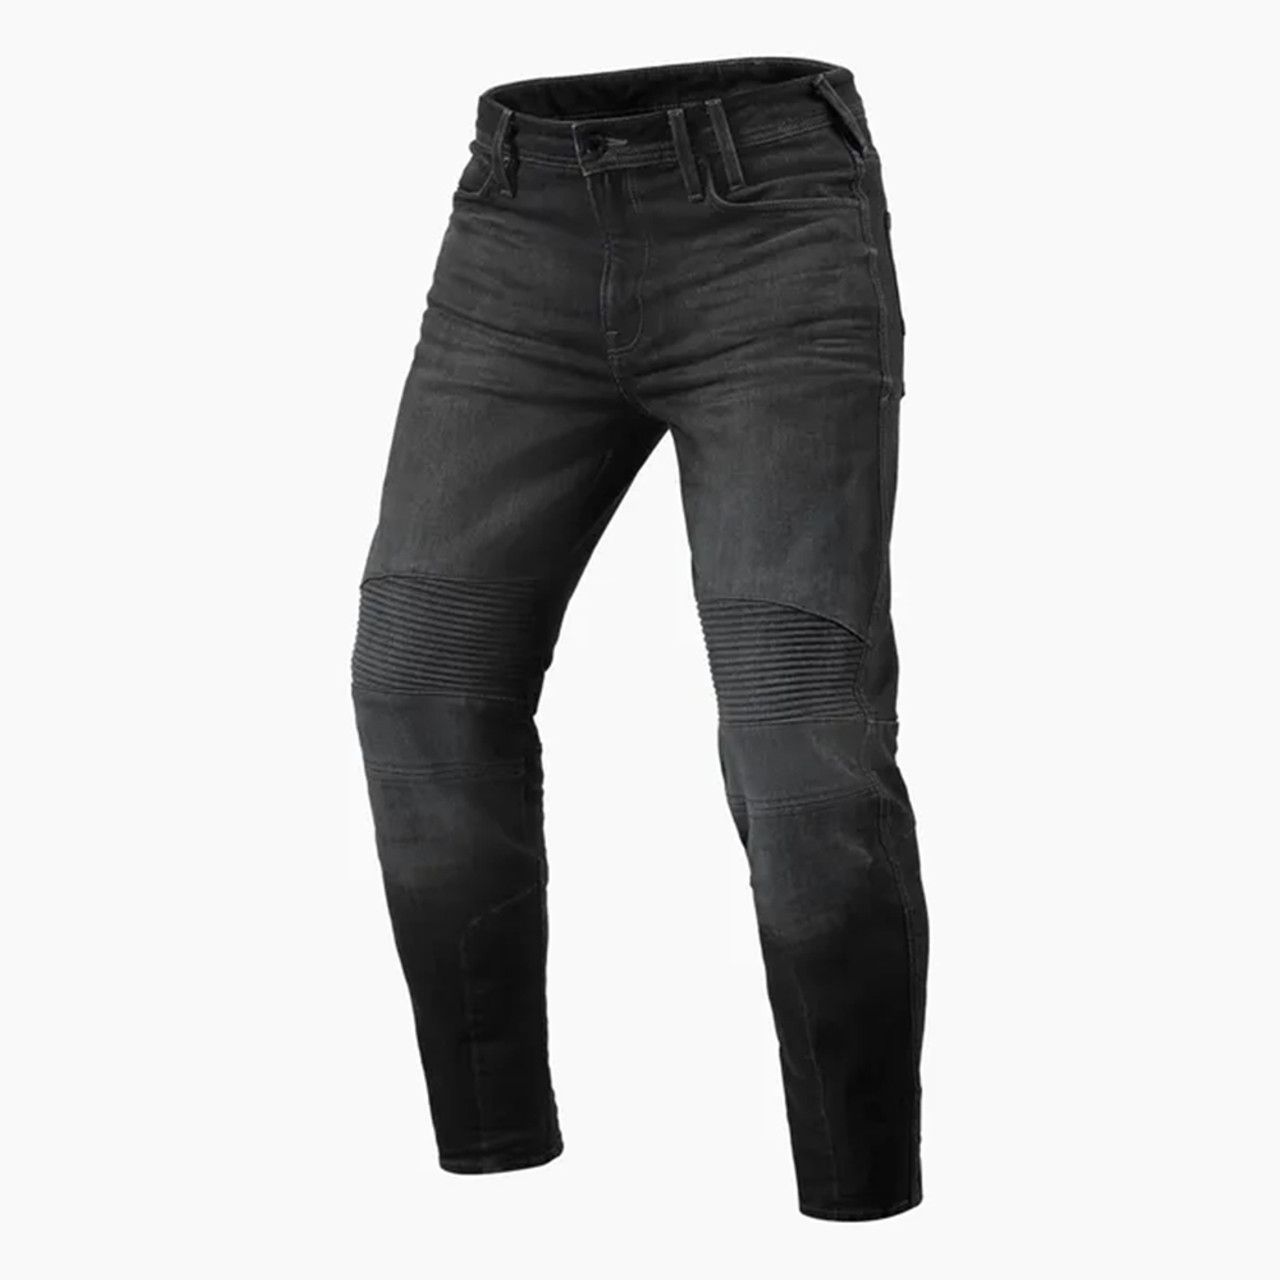 REVIT MOTO 2 Tapered Motorcycle Jeans Review 